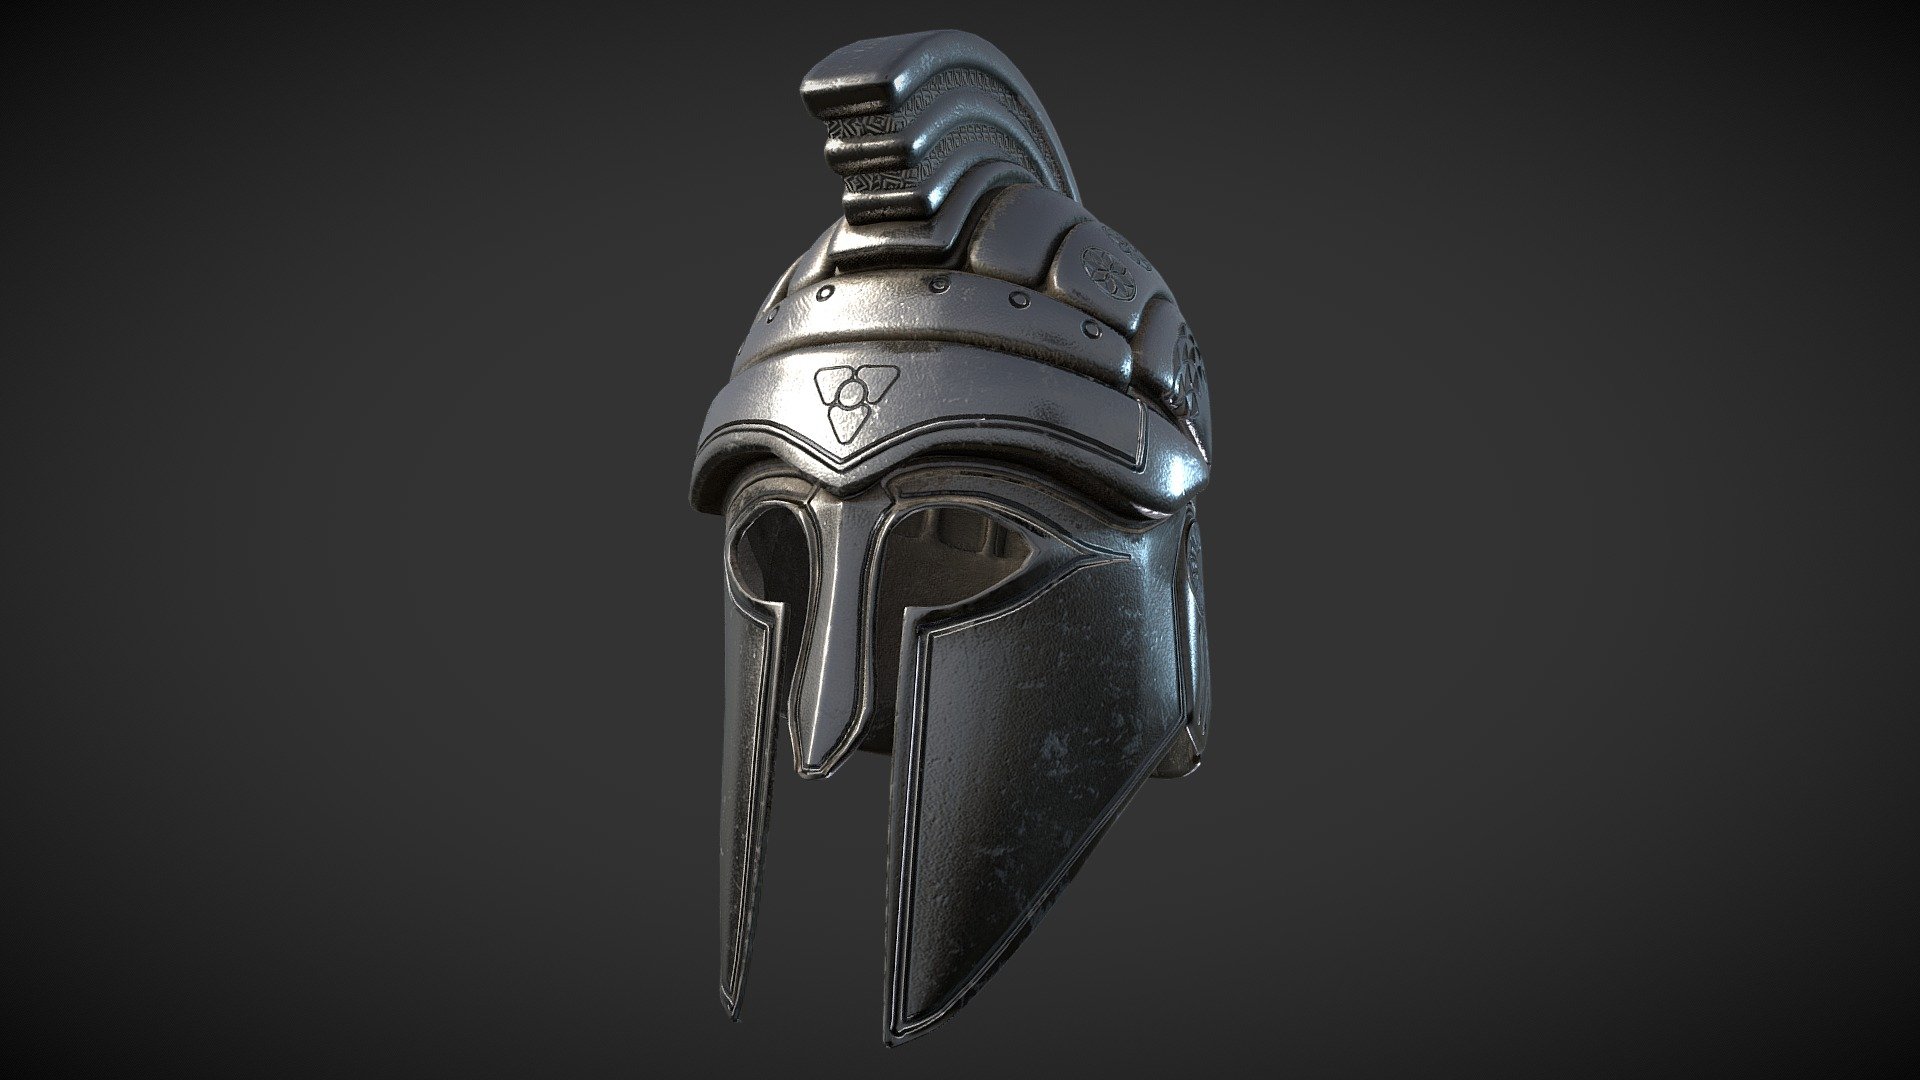 Fantasy Corinthian Greek Helmet - Model/Art by Outworld Studios

Must give credit to Outworld Studios if using the asset.

Show support by joining my discord: https://discord.gg/EgWSkp8Cxn - Fantasy Corinthian Greek Helmet - Buy Royalty Free 3D model by Outworld Studios (@outworldstudios) 3d model